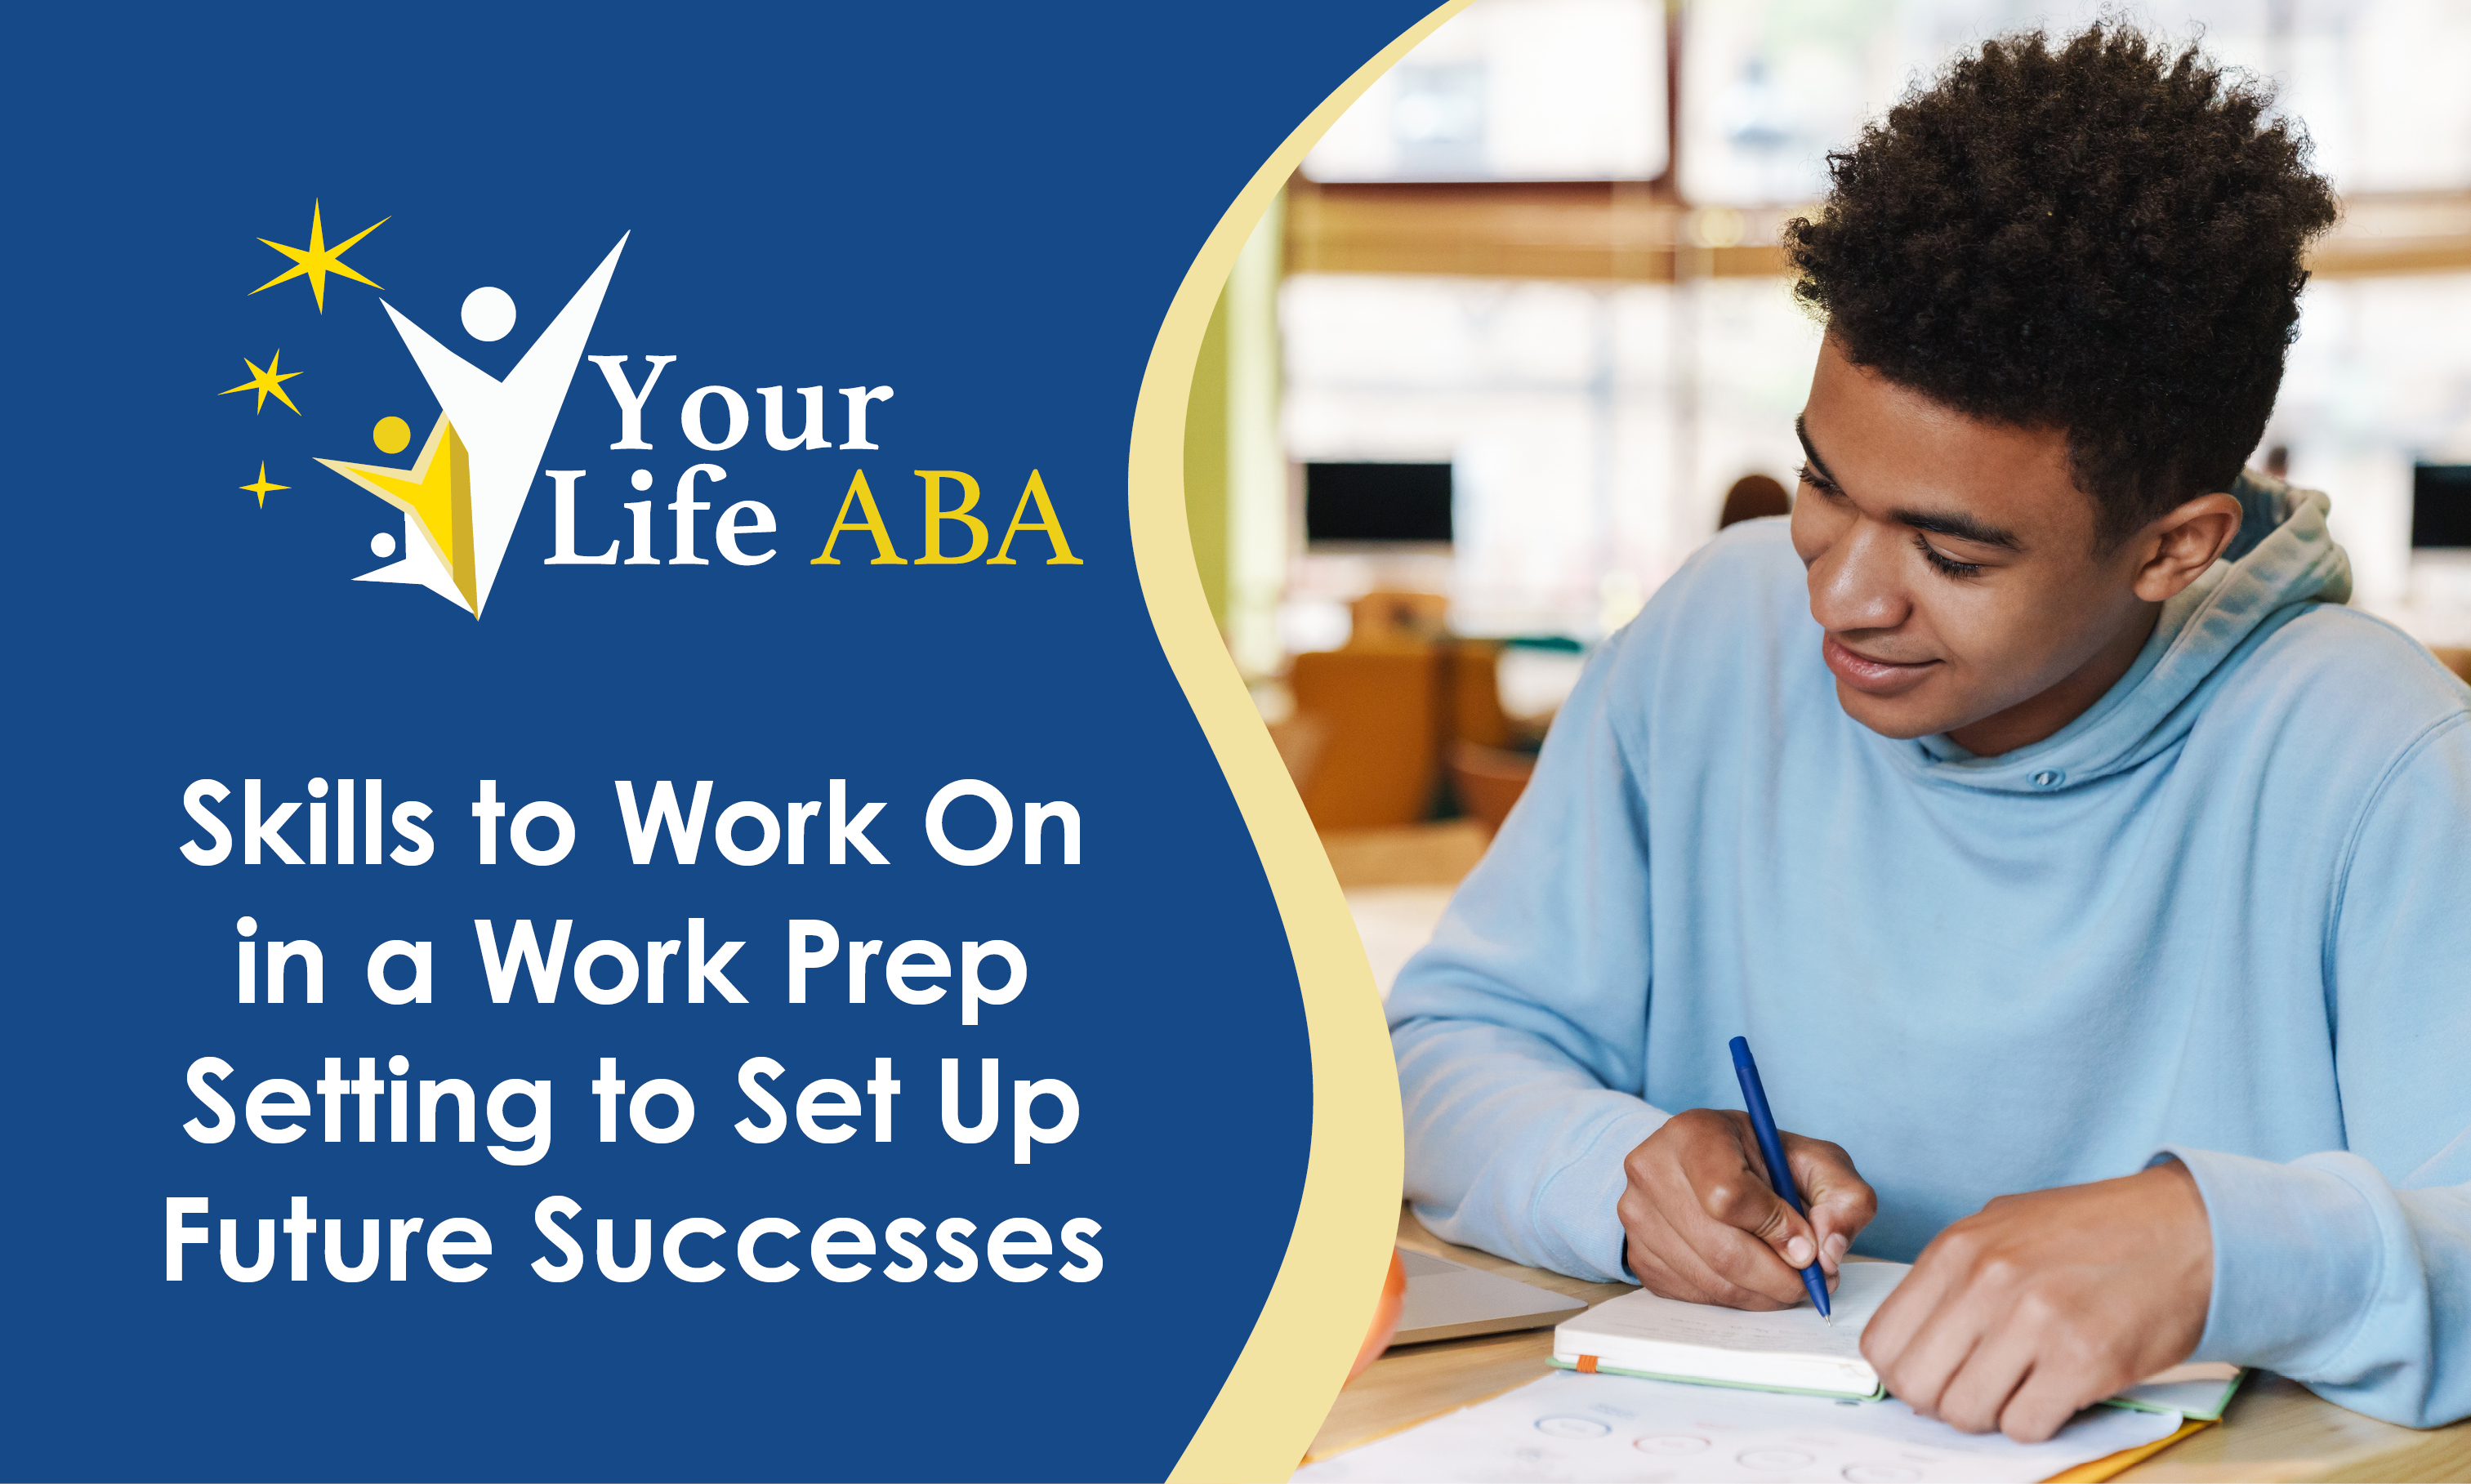 Skills to Work On in a Work Prep Setting to Set Up Future Successes